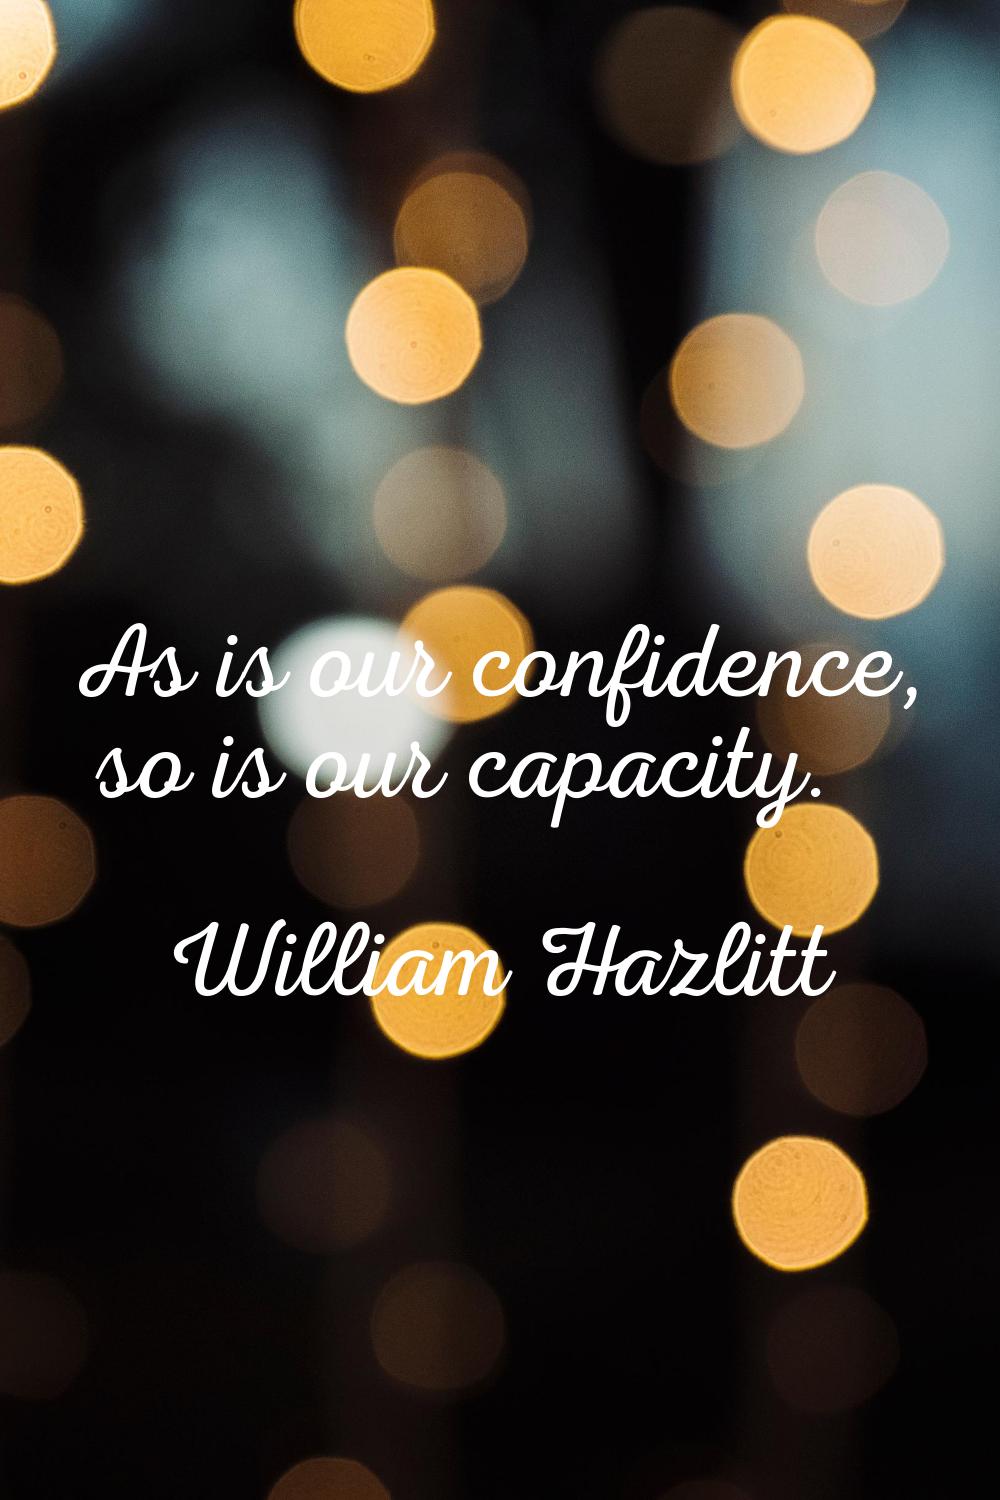 As is our confidence, so is our capacity.